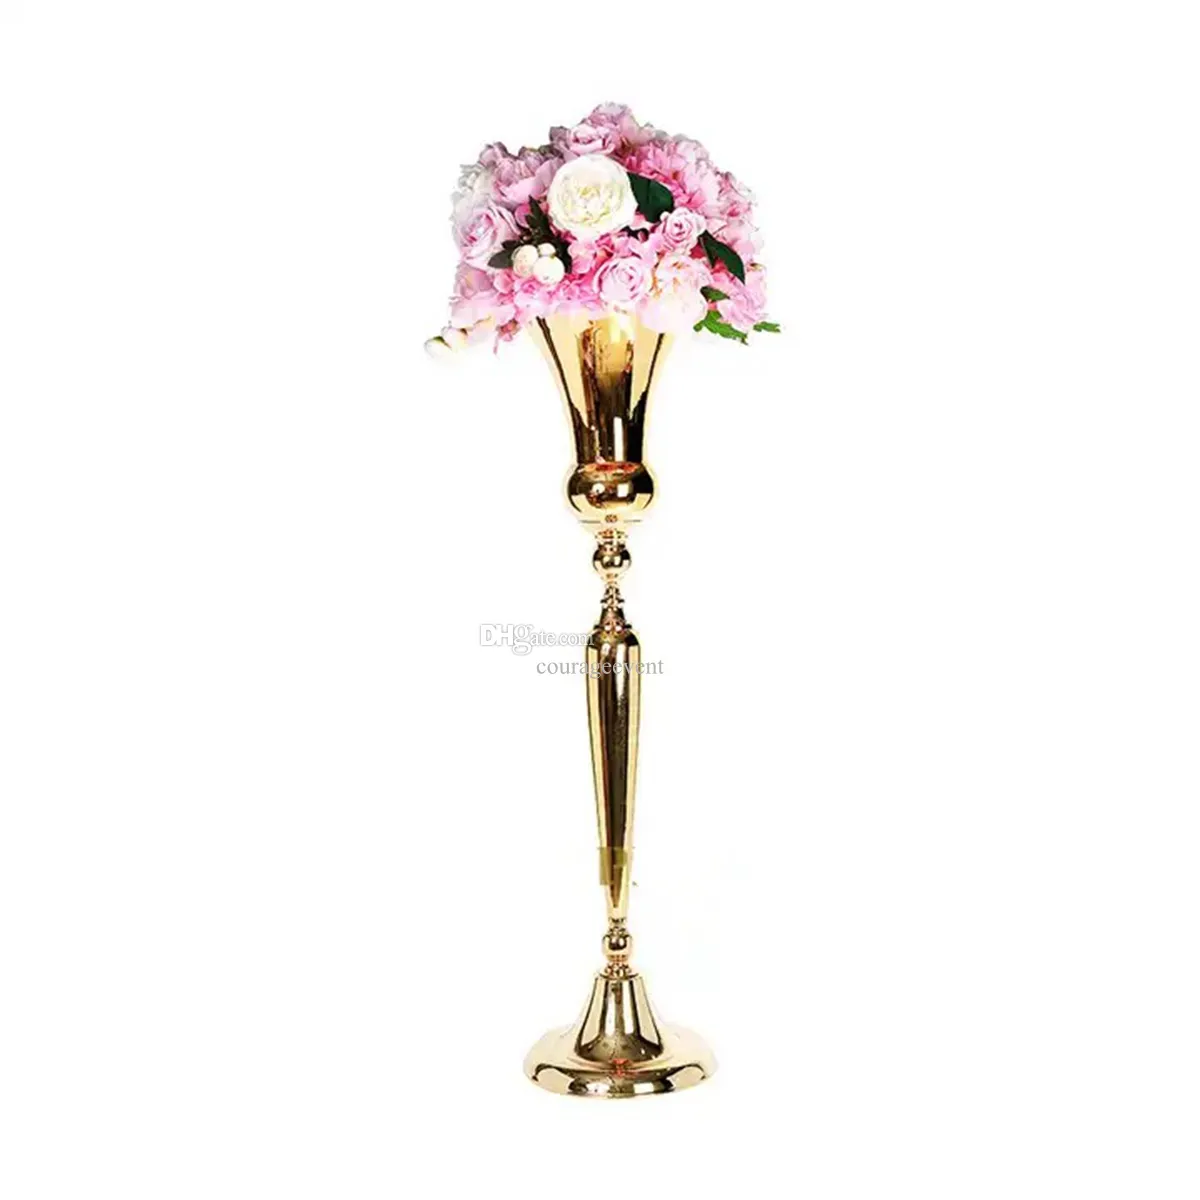 80cm to 120cm tall)Gold Metal Flower Vases Table Centerpieces Trumpet Floral Stand Designs for Wedding Christmas Events Party Decoration